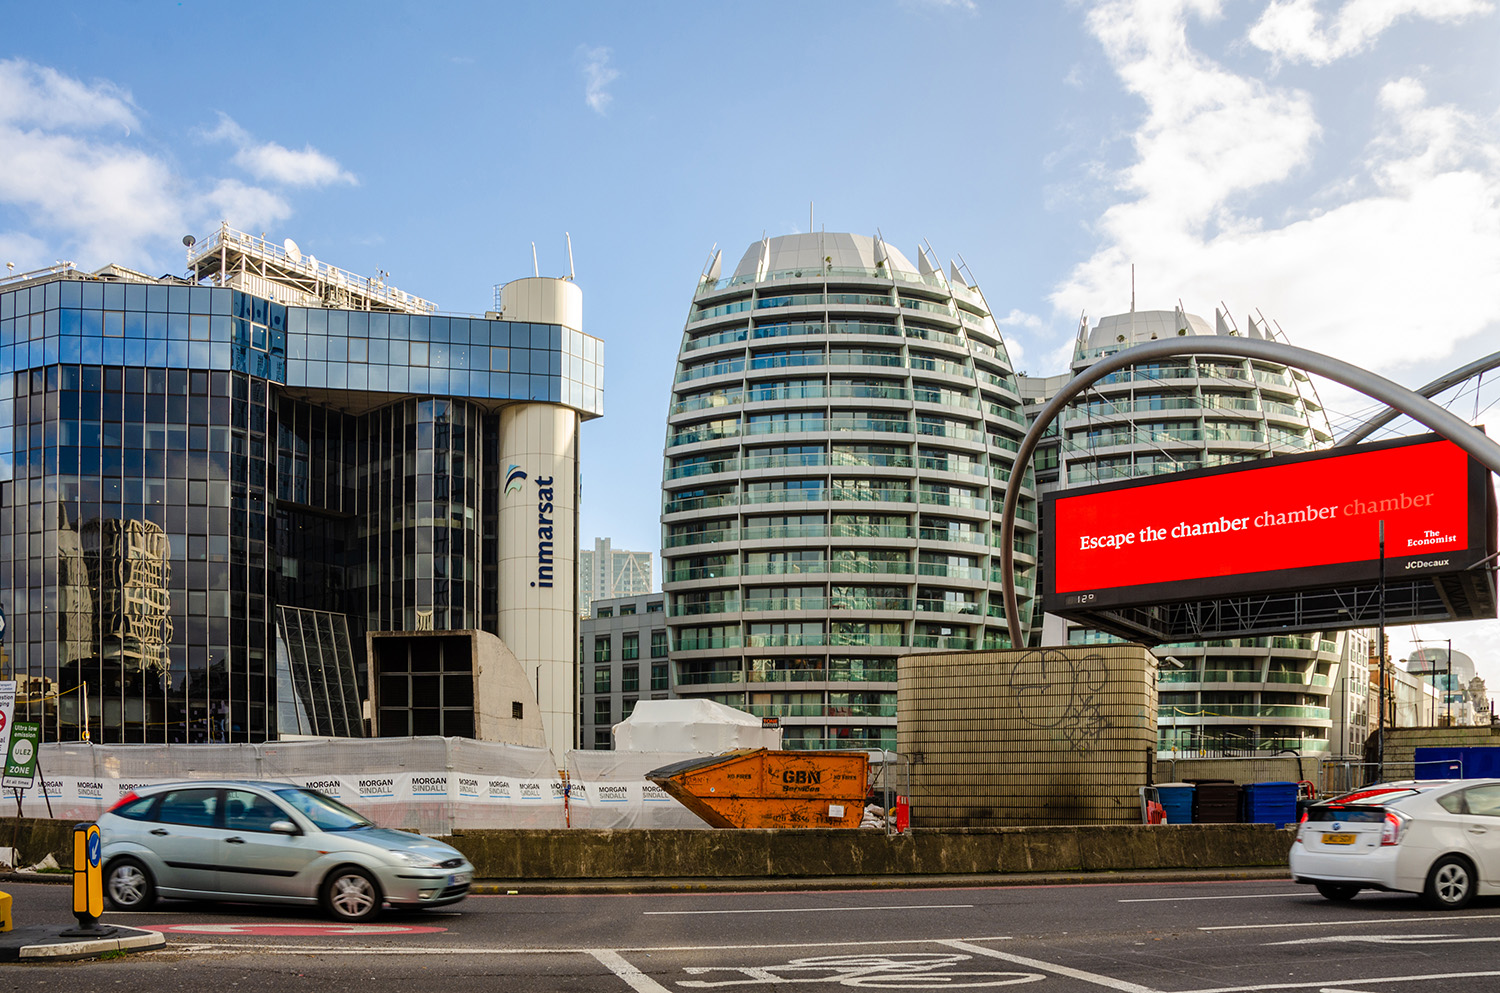 New, hi-tech companies around Old Street roundabout, nicknamed 'Silicon Roundabout'